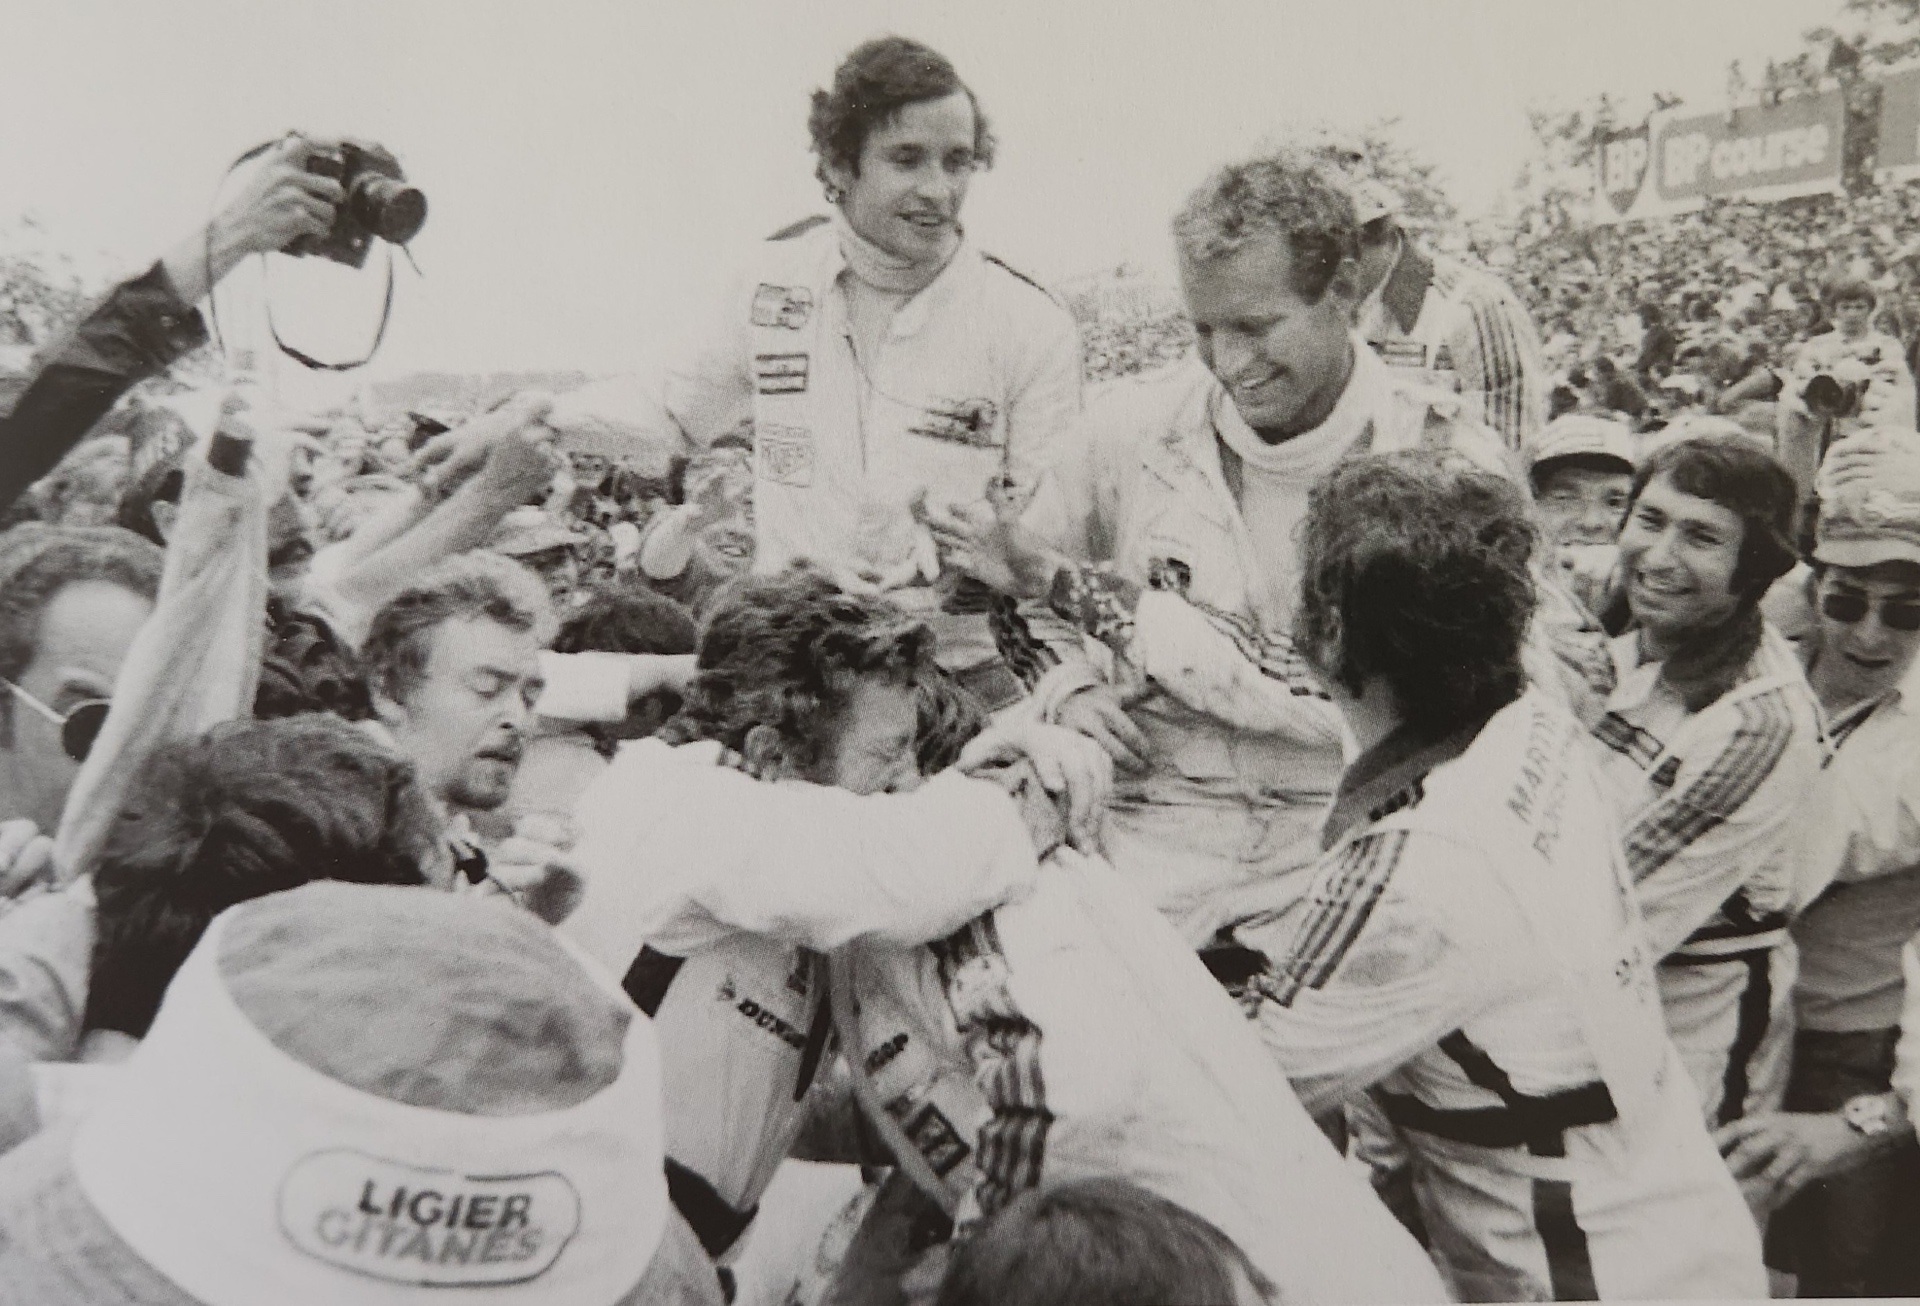 Hurley Haywood wins Le Mans in 1977 with Jacky Ickx and Jurgen Barth in a Porsche 936